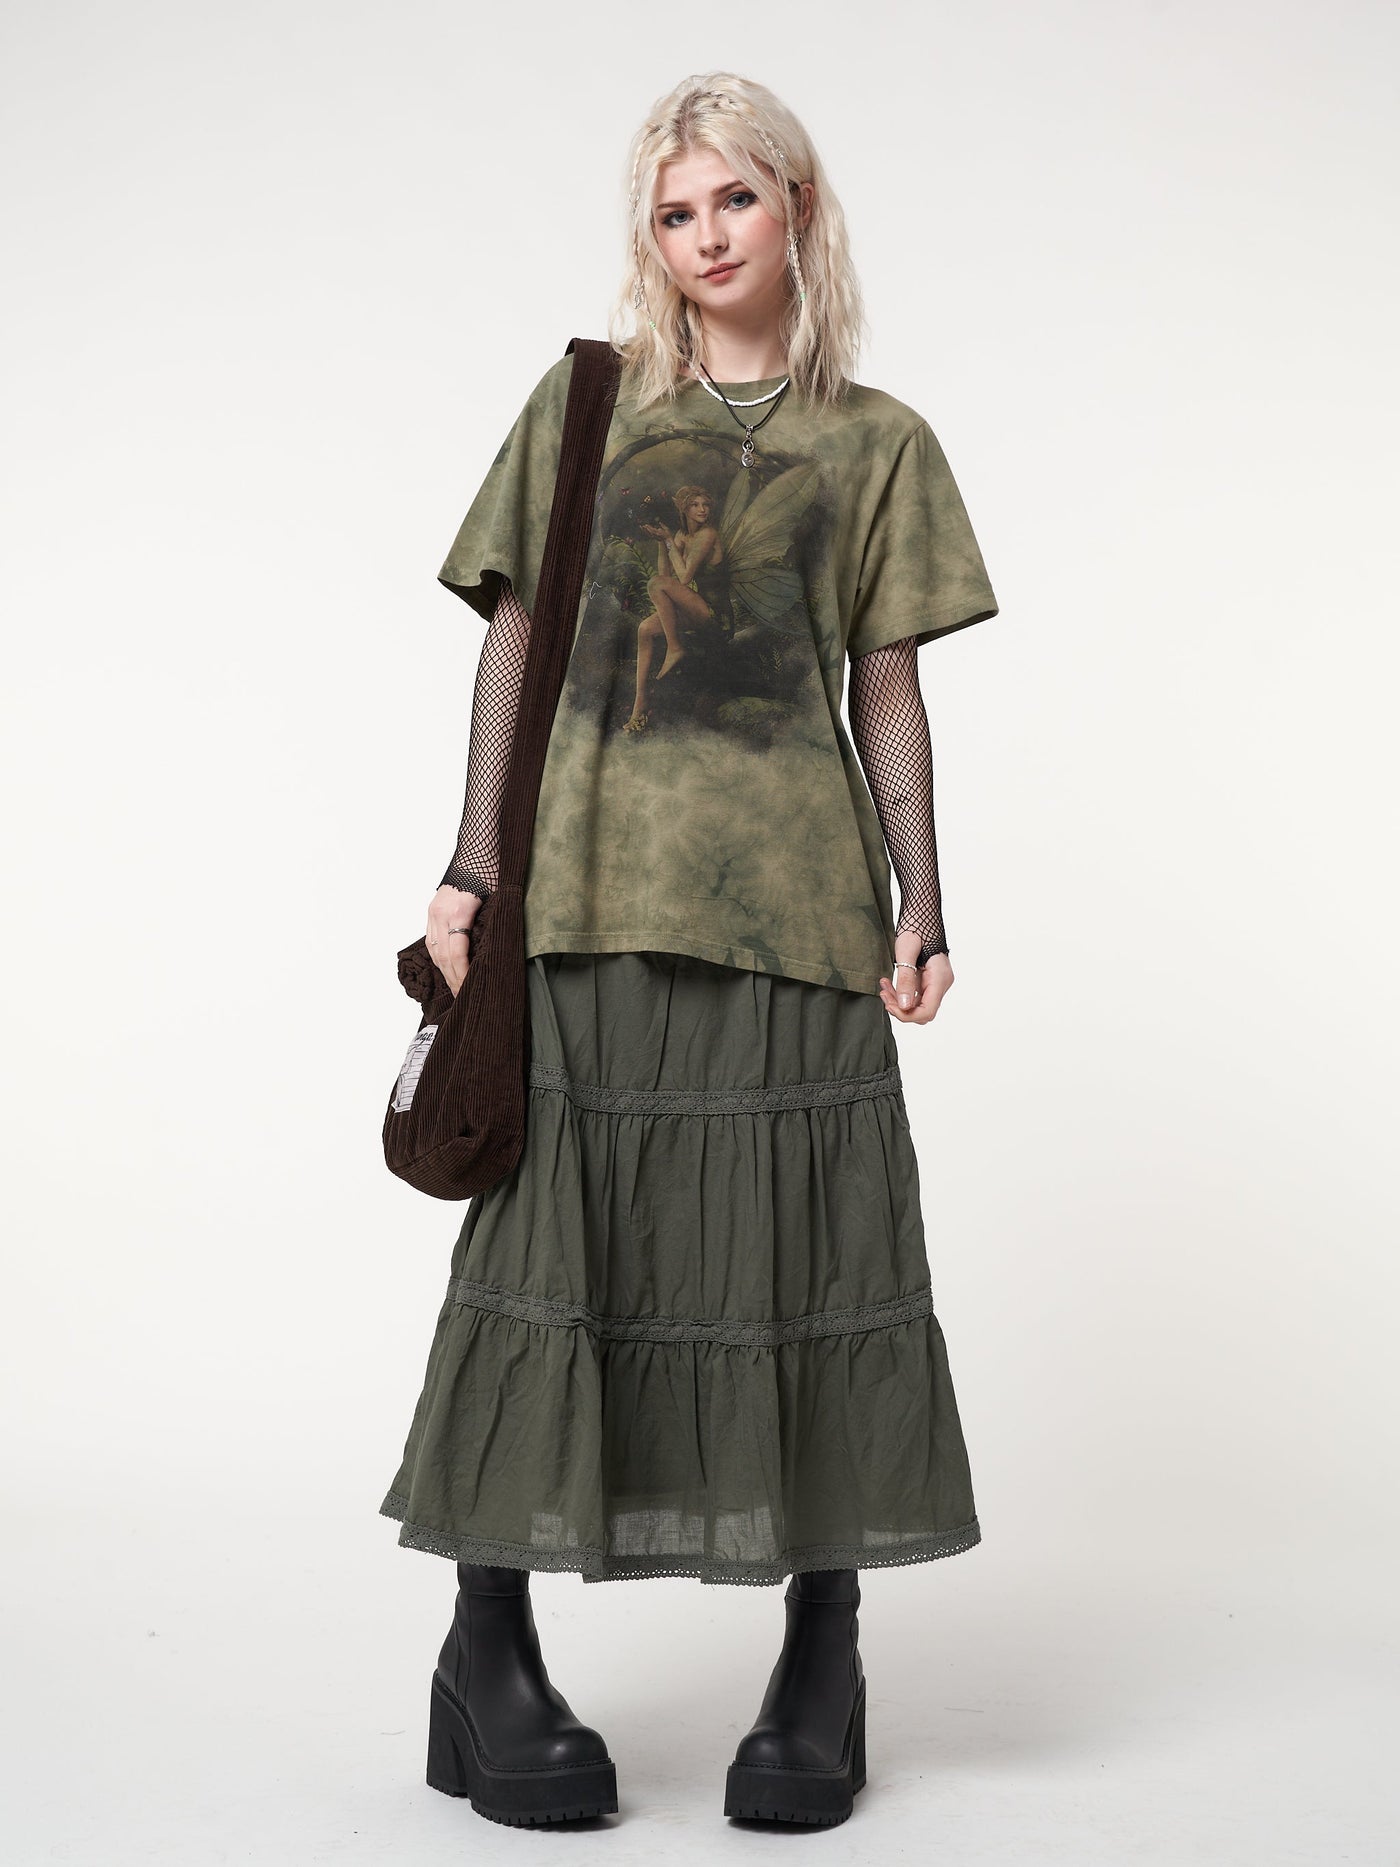 Tie dye t-shirt in olive green with forest fairy front print